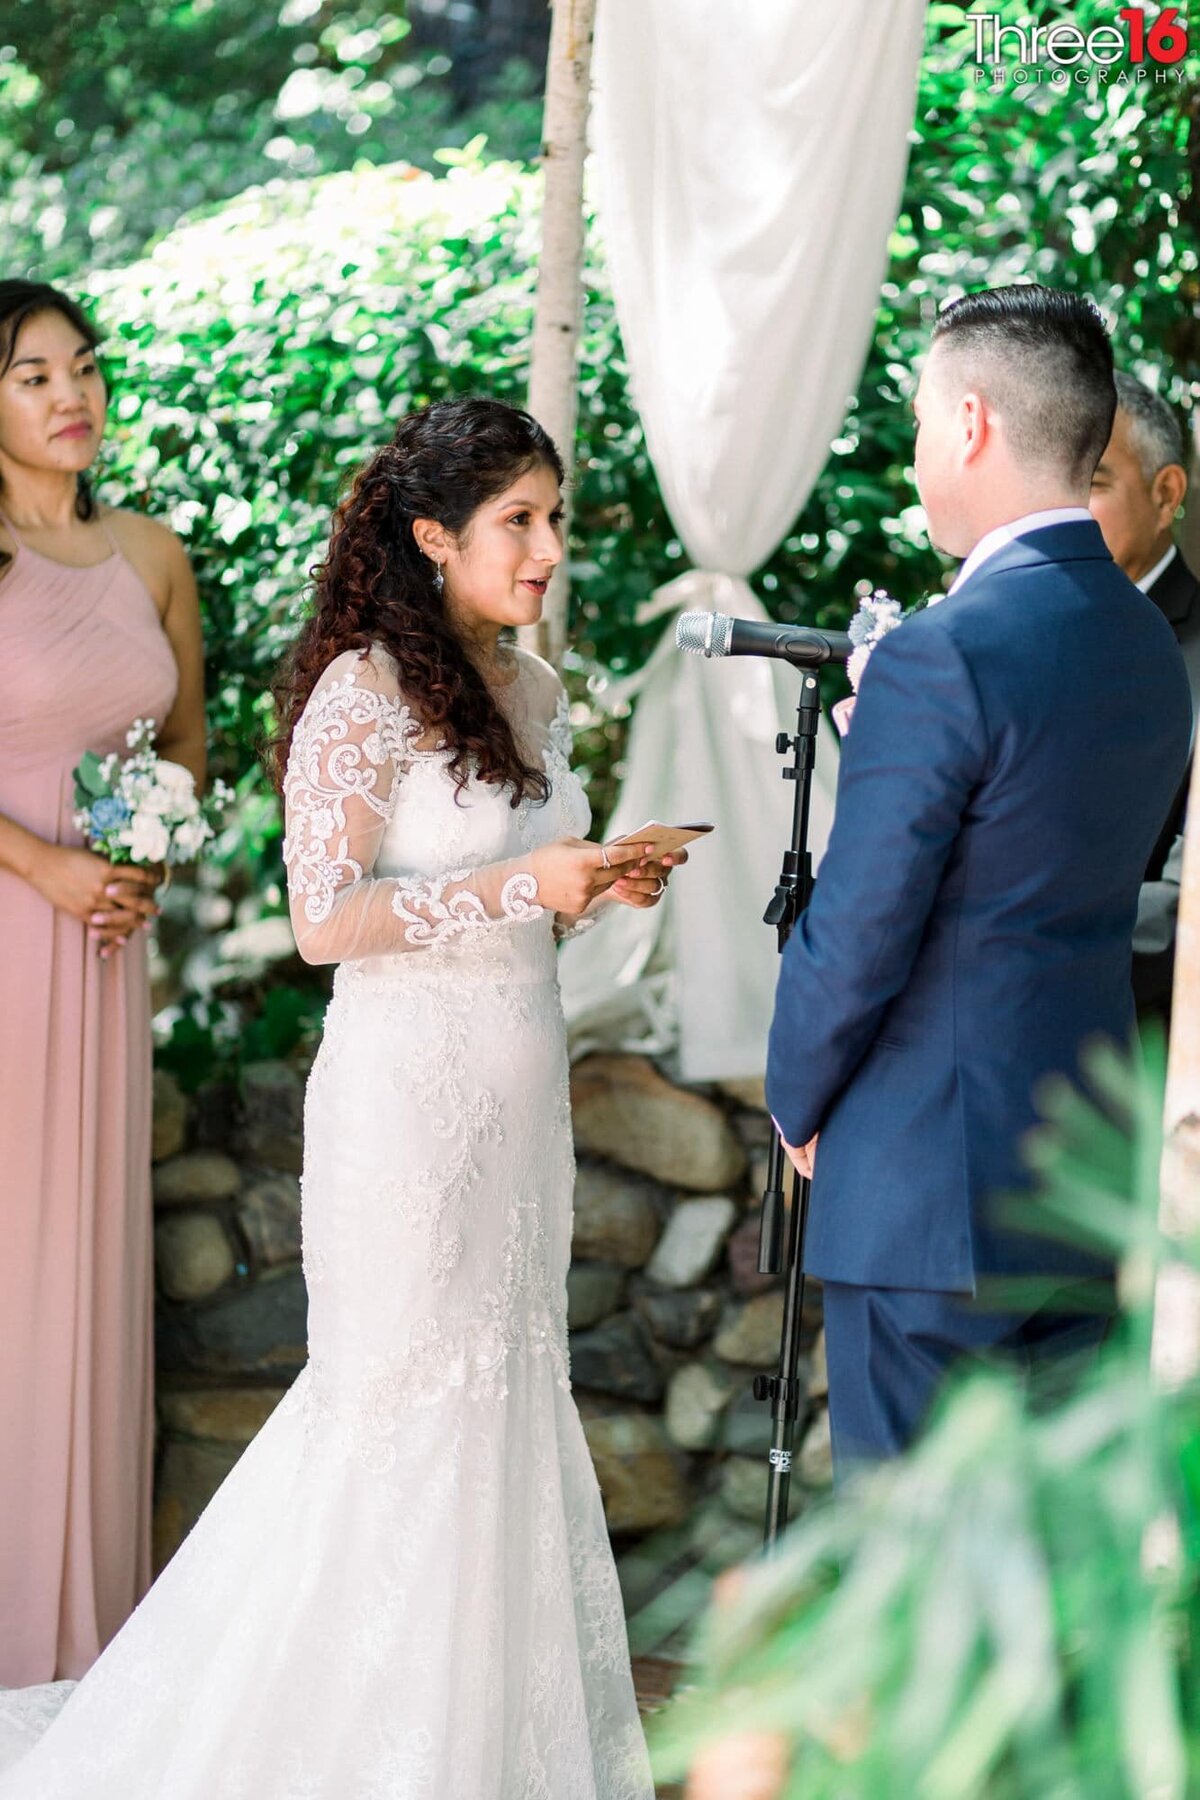 Bride reads her vows to her Groom into a microphone while standing at the altar